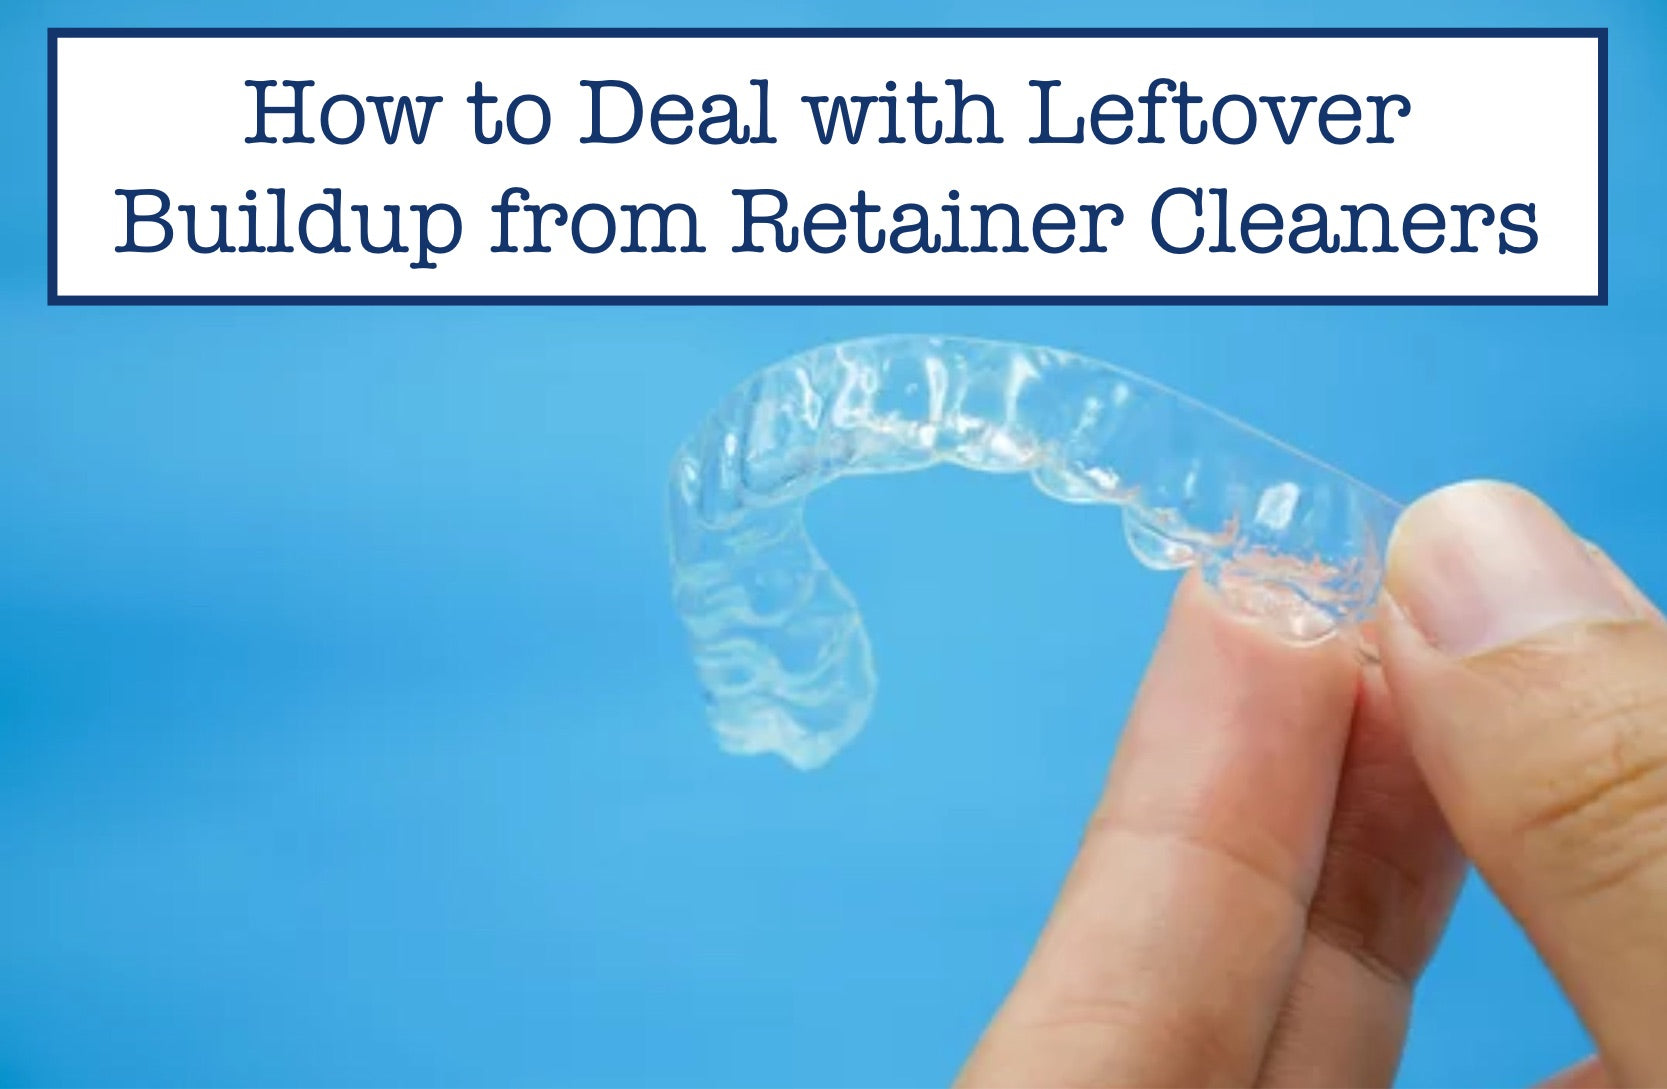 How to Deal with Leftover Buildup from Retainer Cleaners